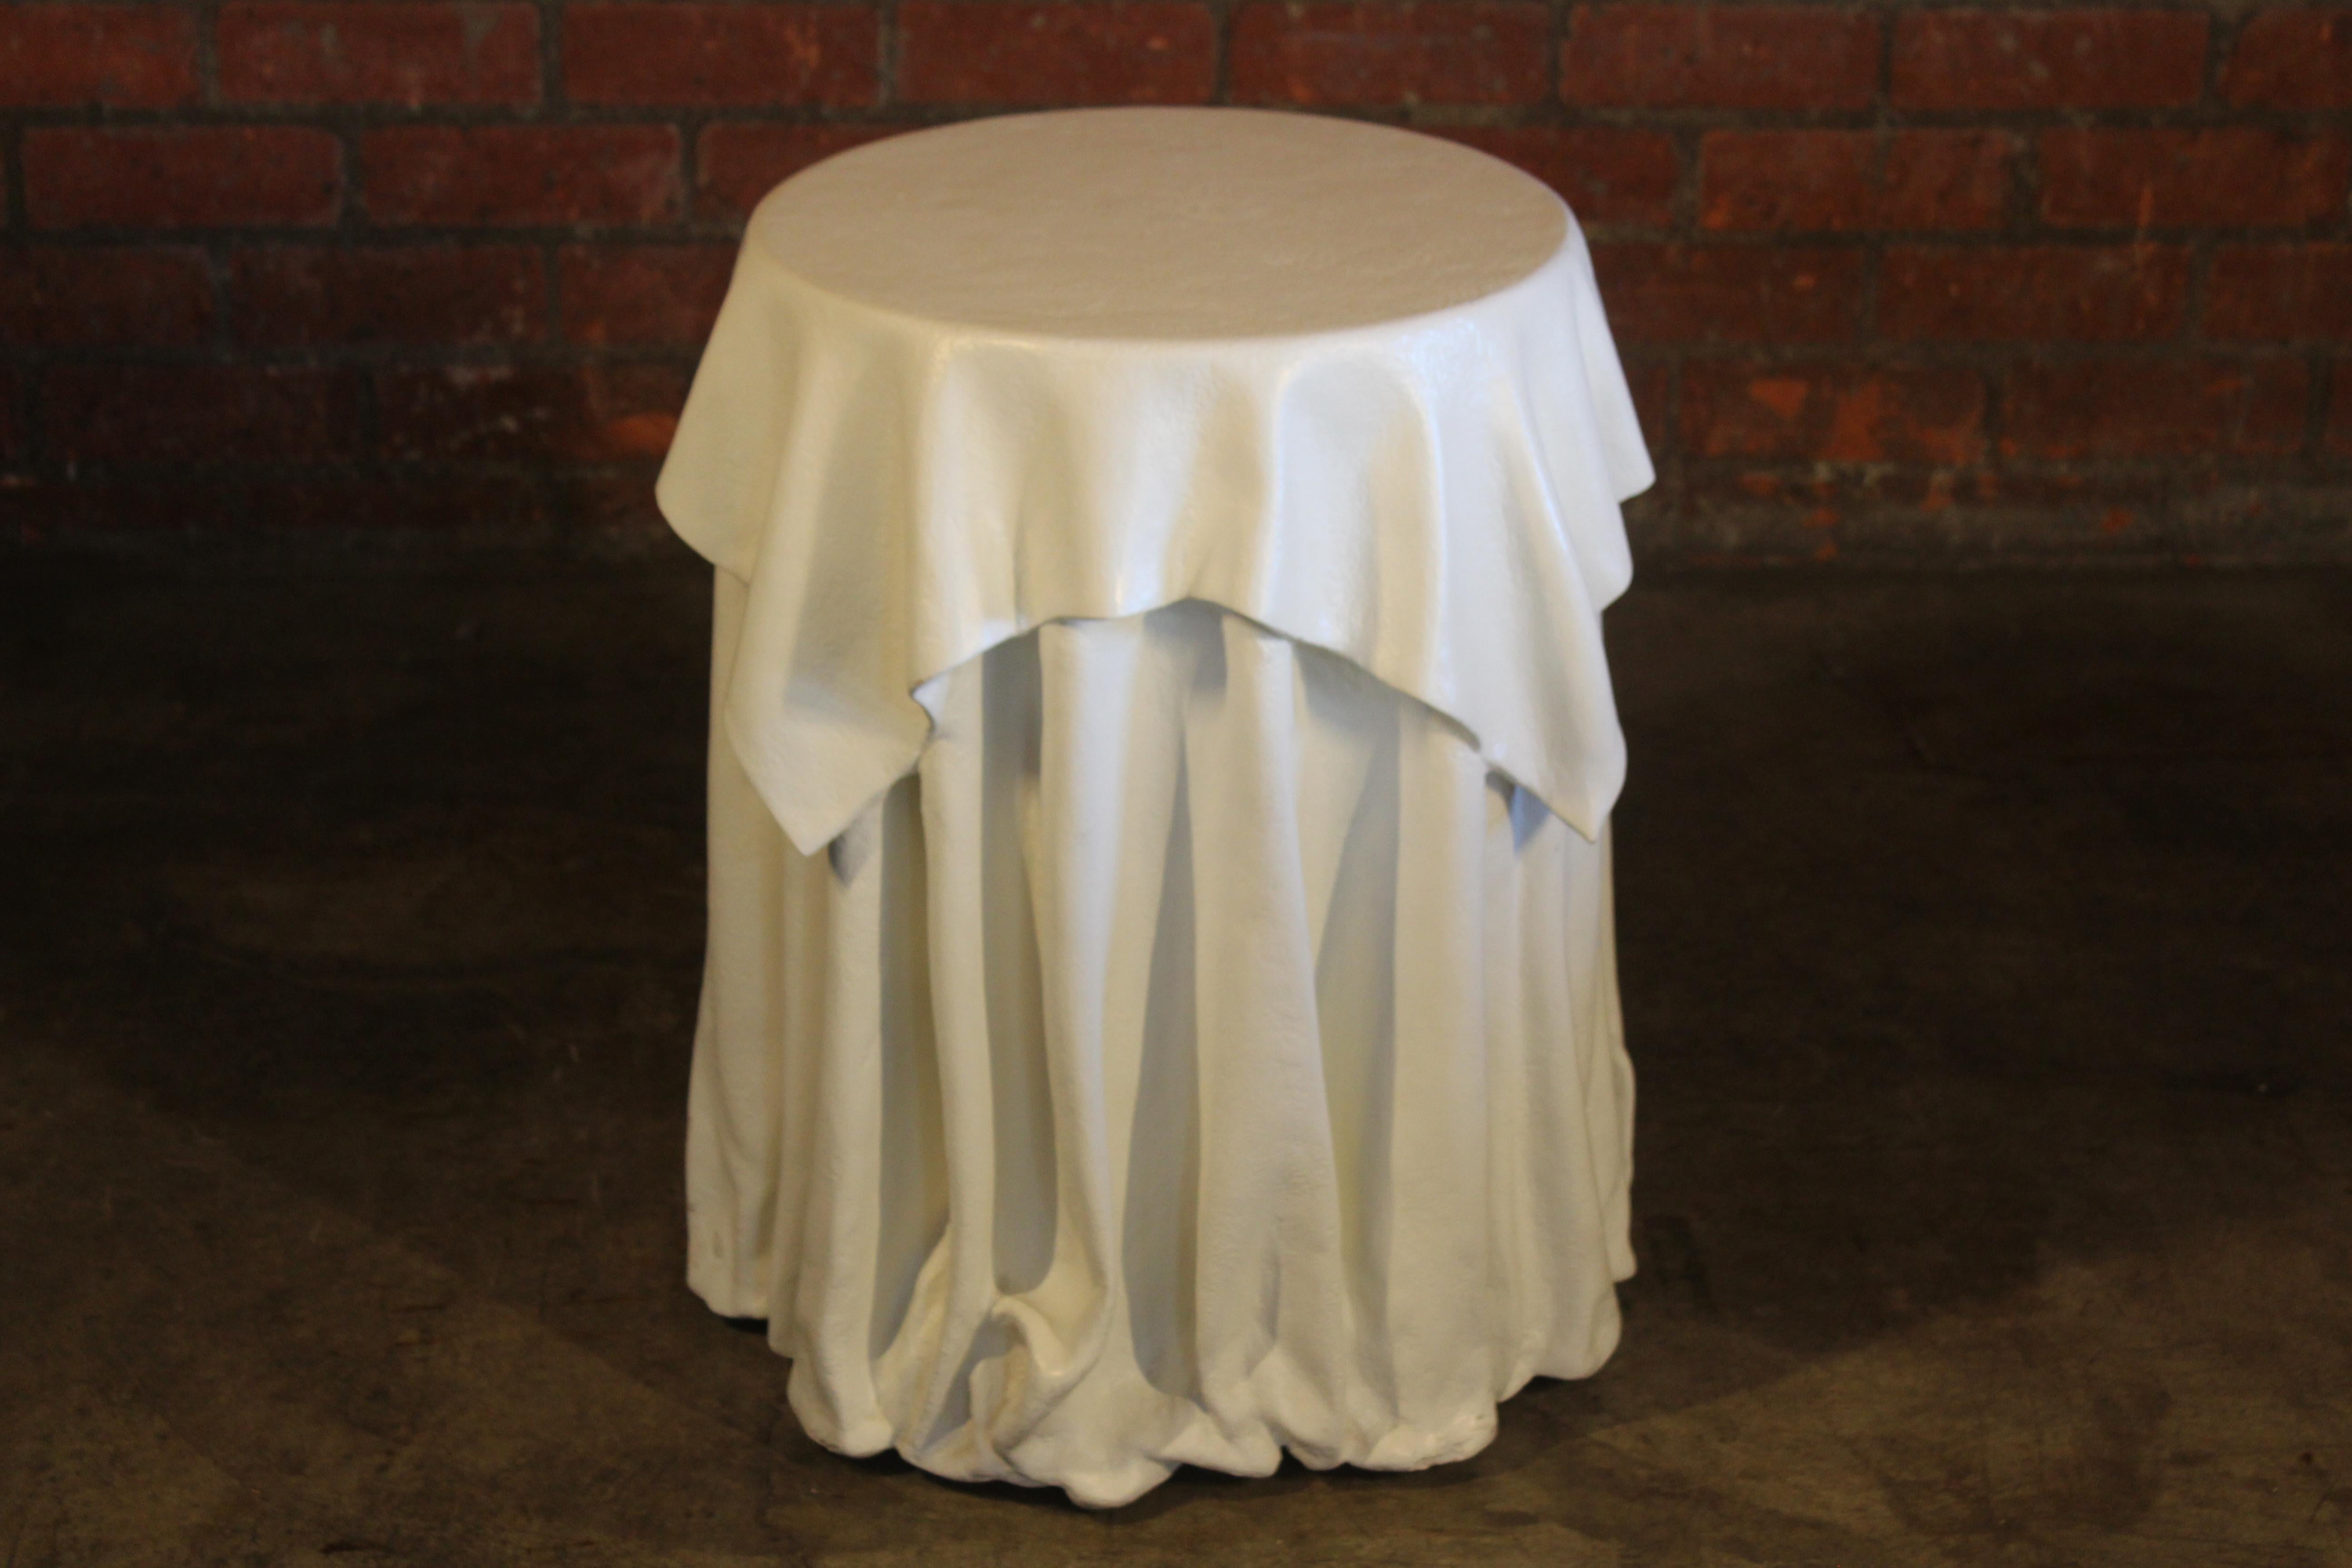 A vintage Trompe-l'oeil Draped Plaster Table after John Dickinson. In good condition. From the estate of a Century City collector in Los Angeles, California.